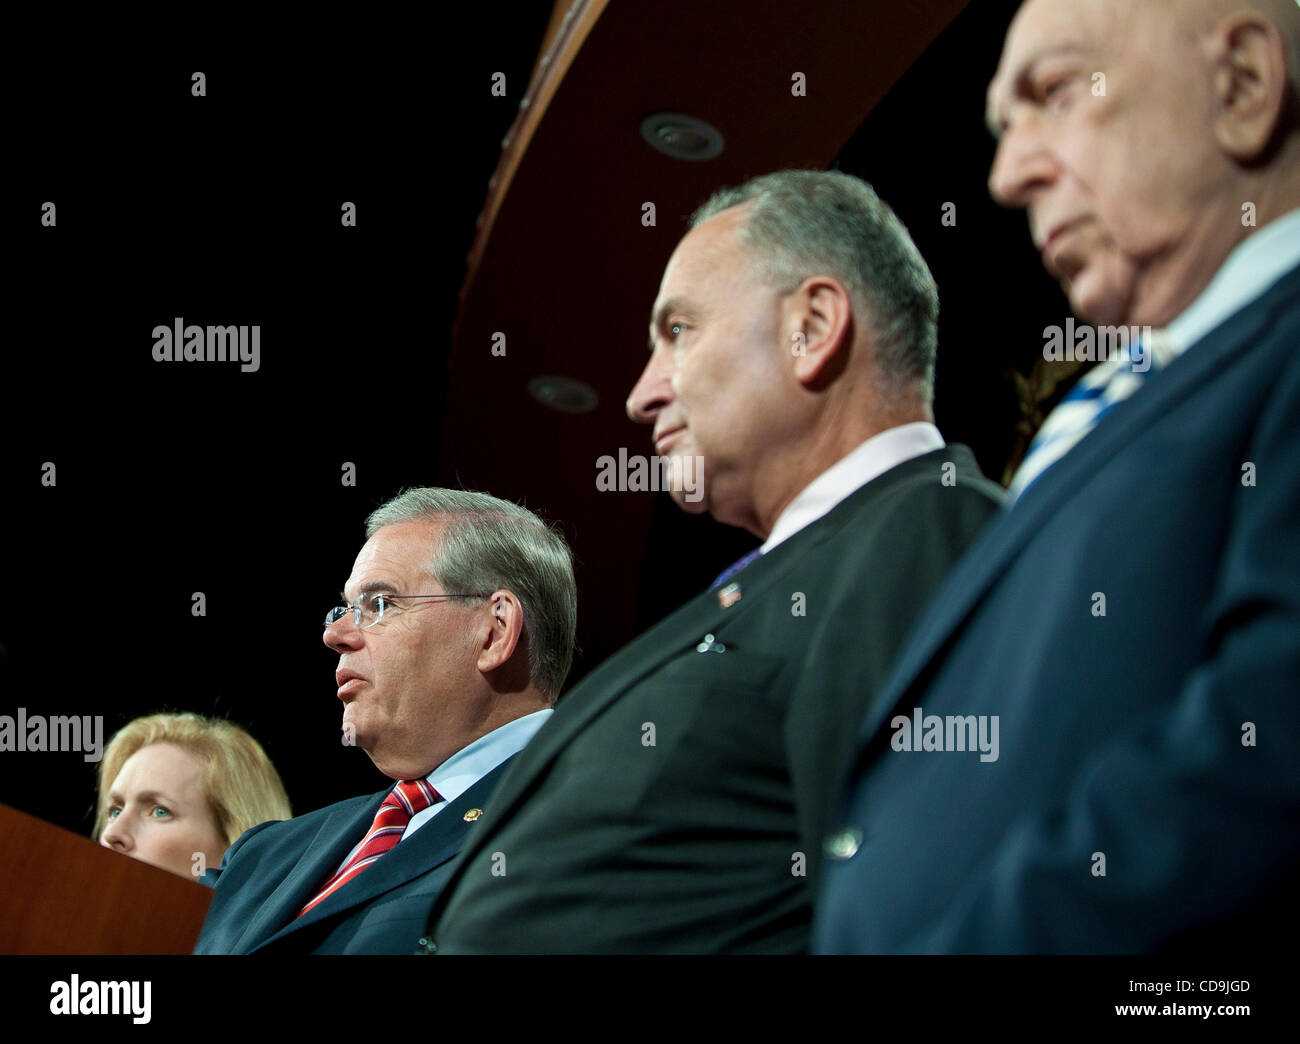 Jul 14, 2010 - Washington, District of Columbia, U.S., -  Senators Kirsten Gillibrand, Bob Menendez, Charles Schumer and Frank Lautenberg hold a press conference urging the British government to investigate whether BP a hand in securing the release of Lockerbie bomber al-Megrahi in order to help clo Stock Photo